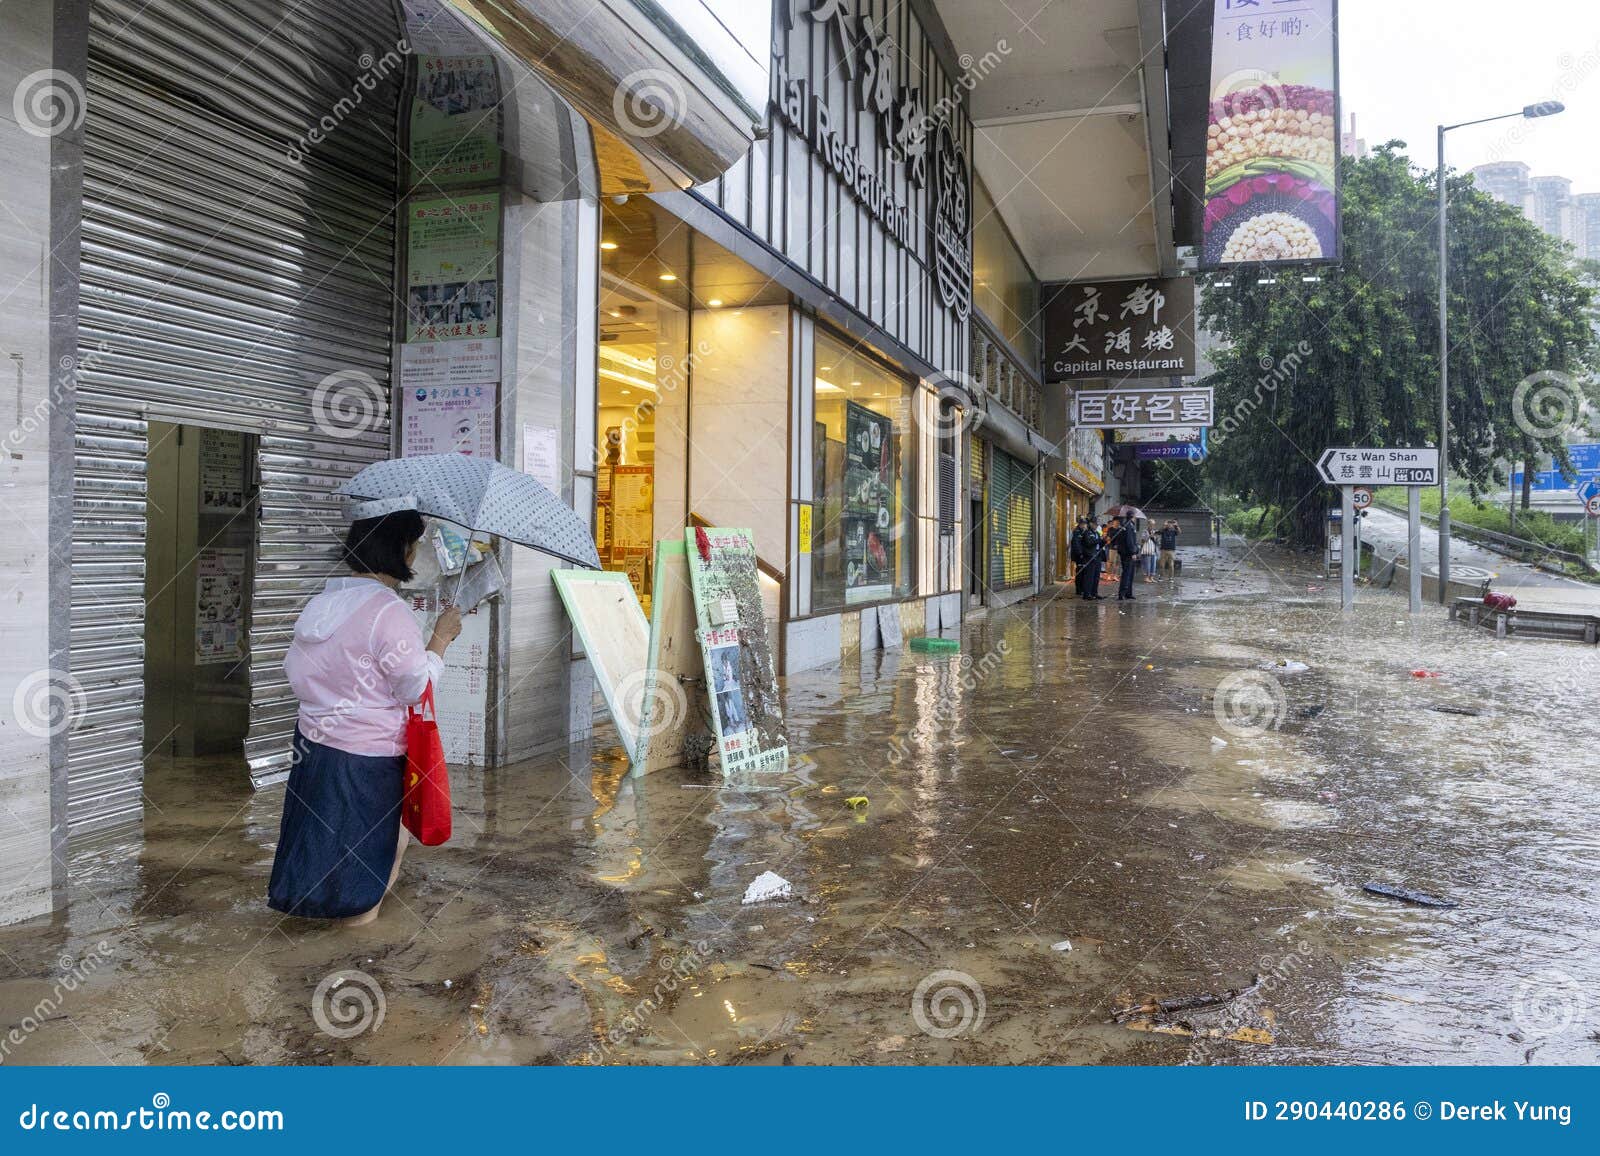 After Heavy Rain in Hong Kong, Citizens Walk in Muddy Water on the ...